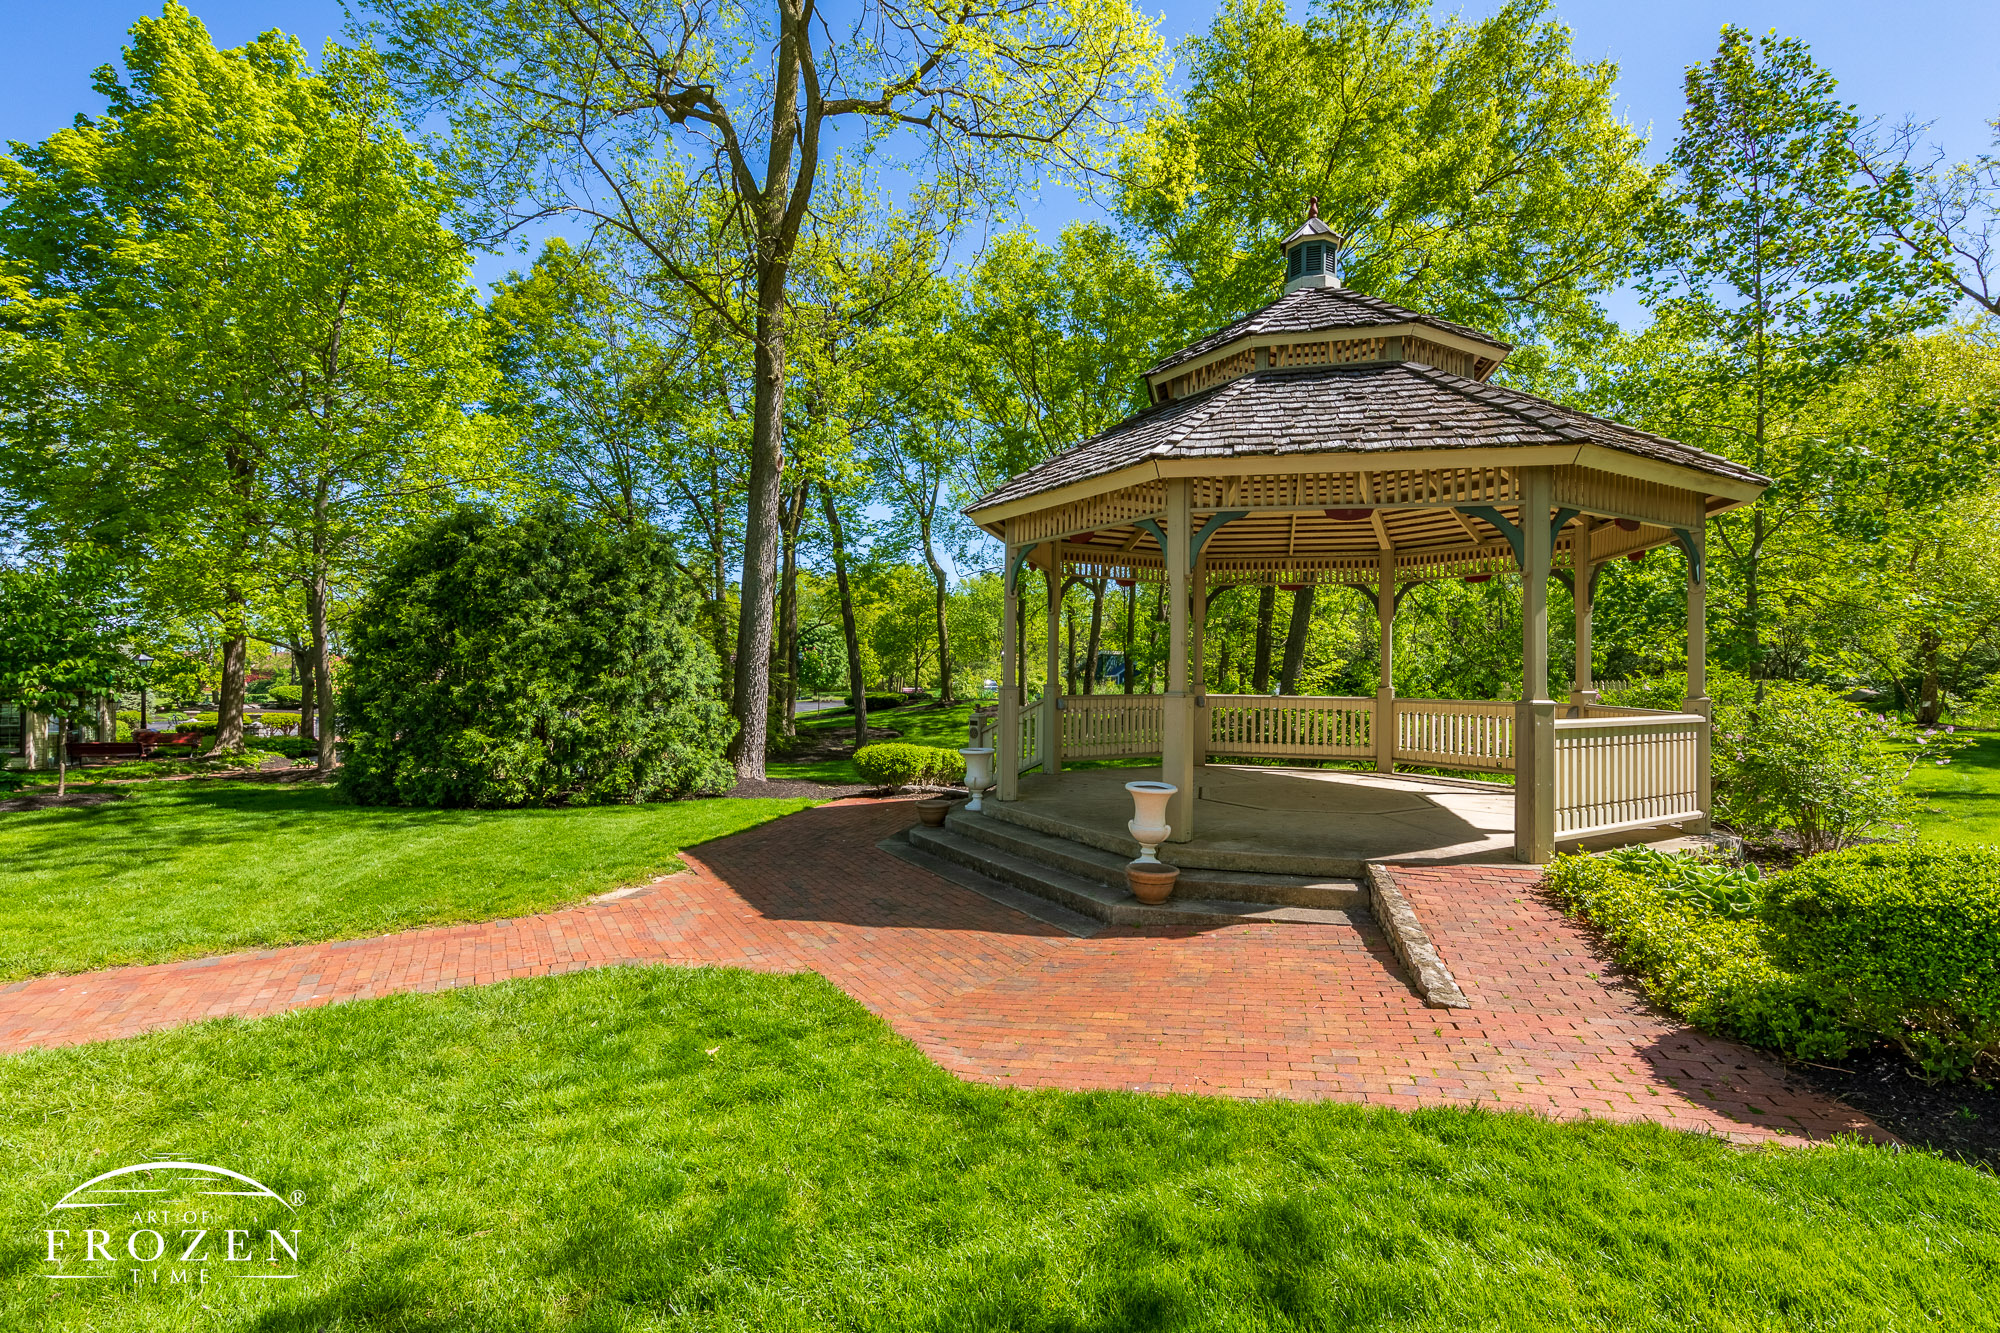 A large gazebo at Benham’s Grove stands among tall trees completing their spring leaf out